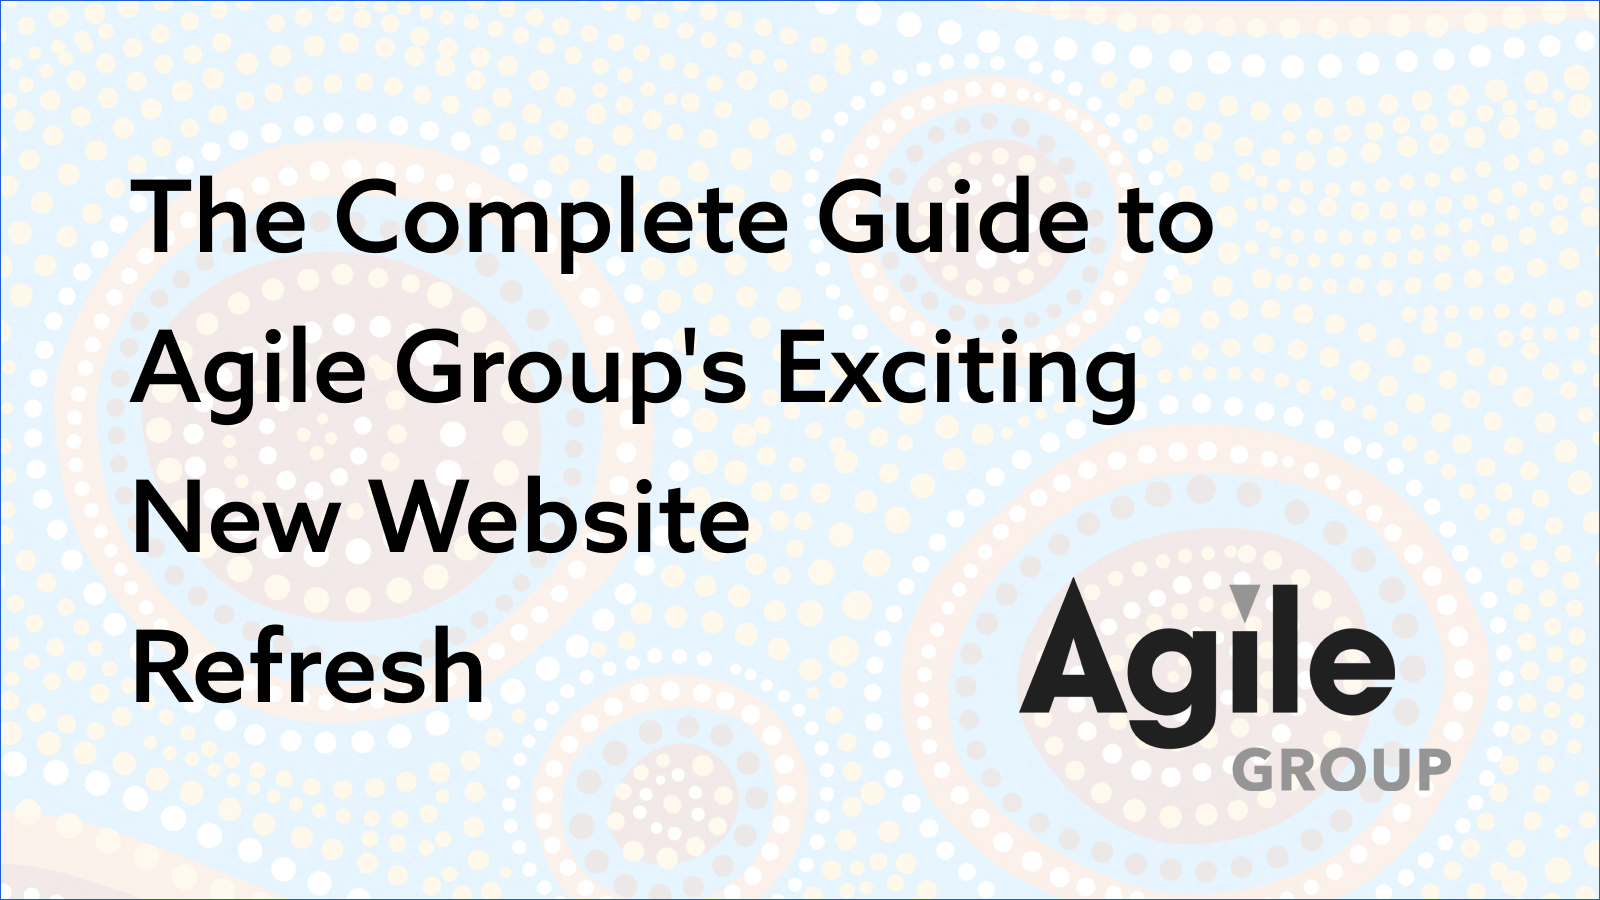 The Complete Guide to Agile Group's Exciting New Website Refresh